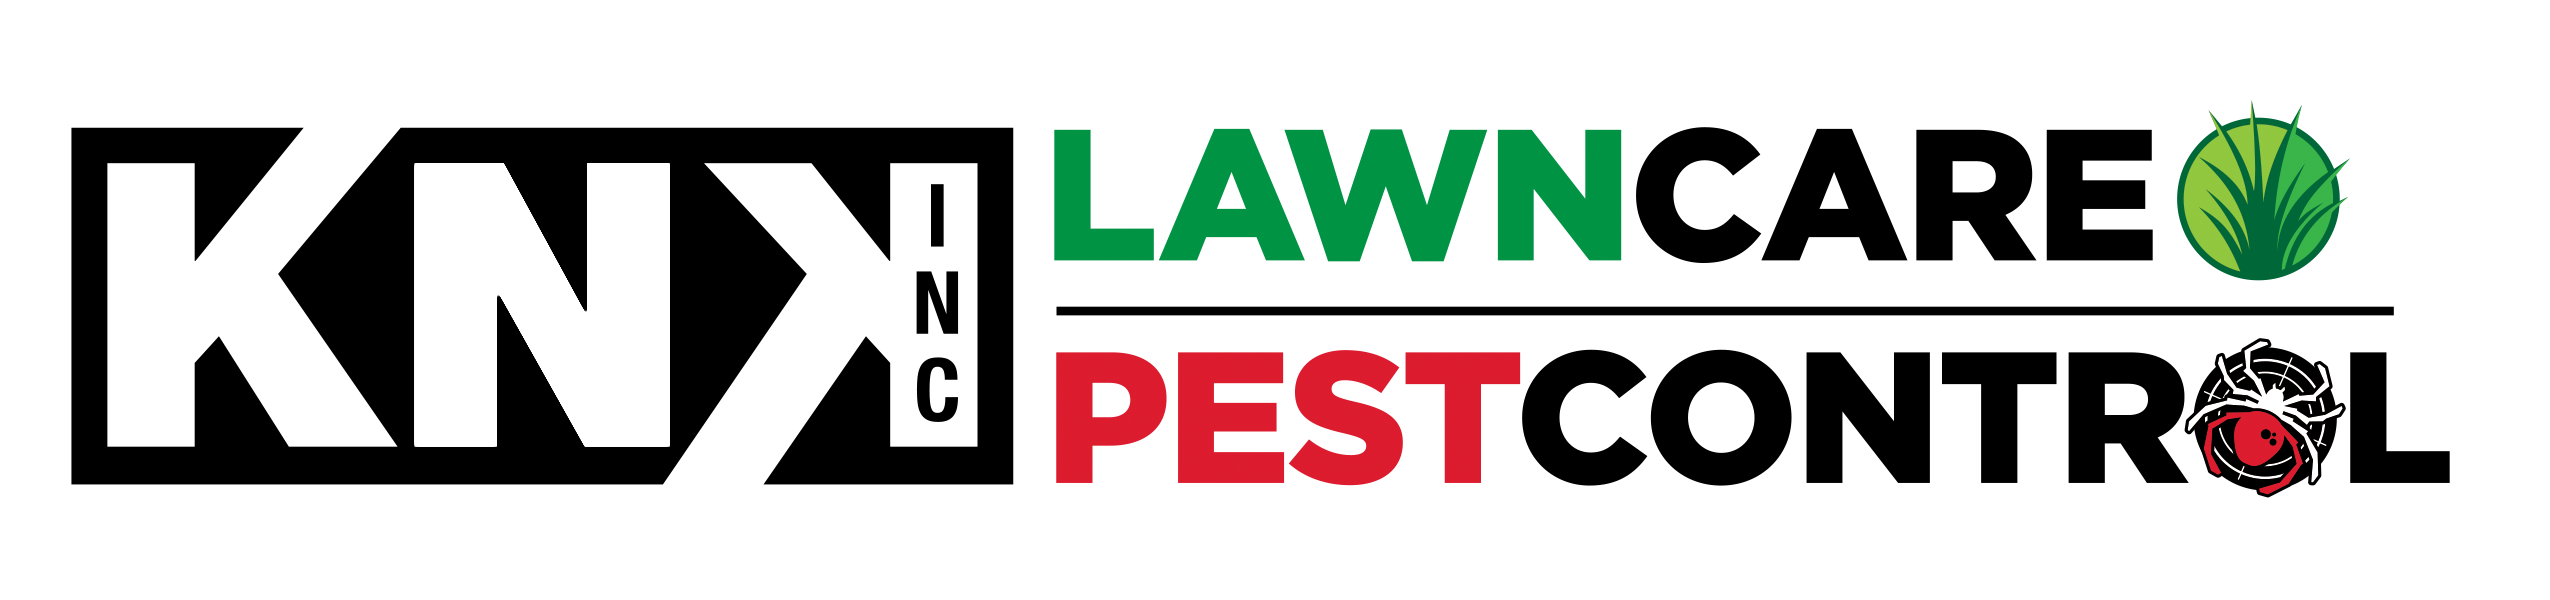 KnK Lawn Care and Pest Control